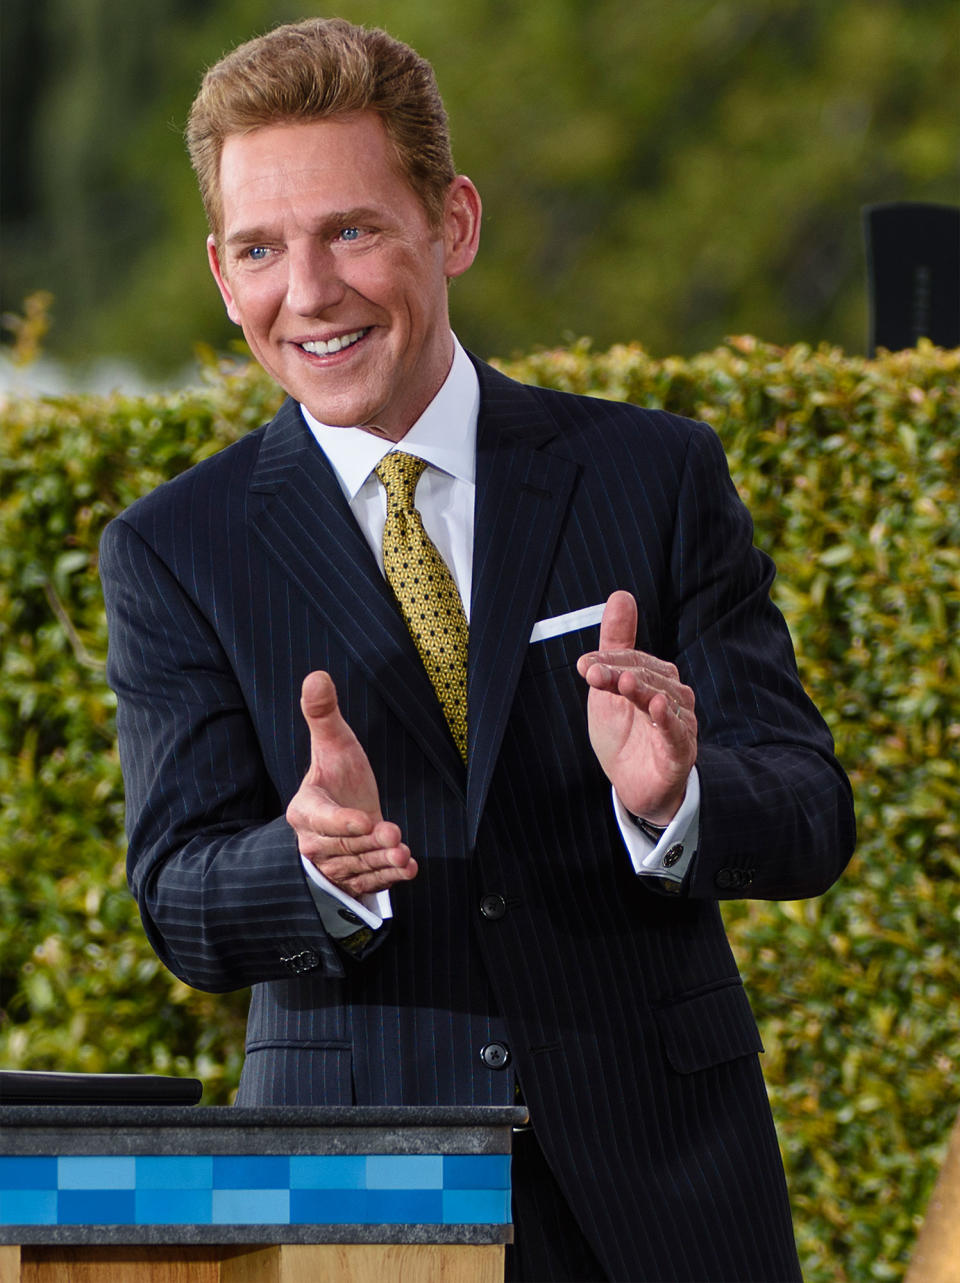 David Miscavige Appears on Camera for Scientology Network Launch